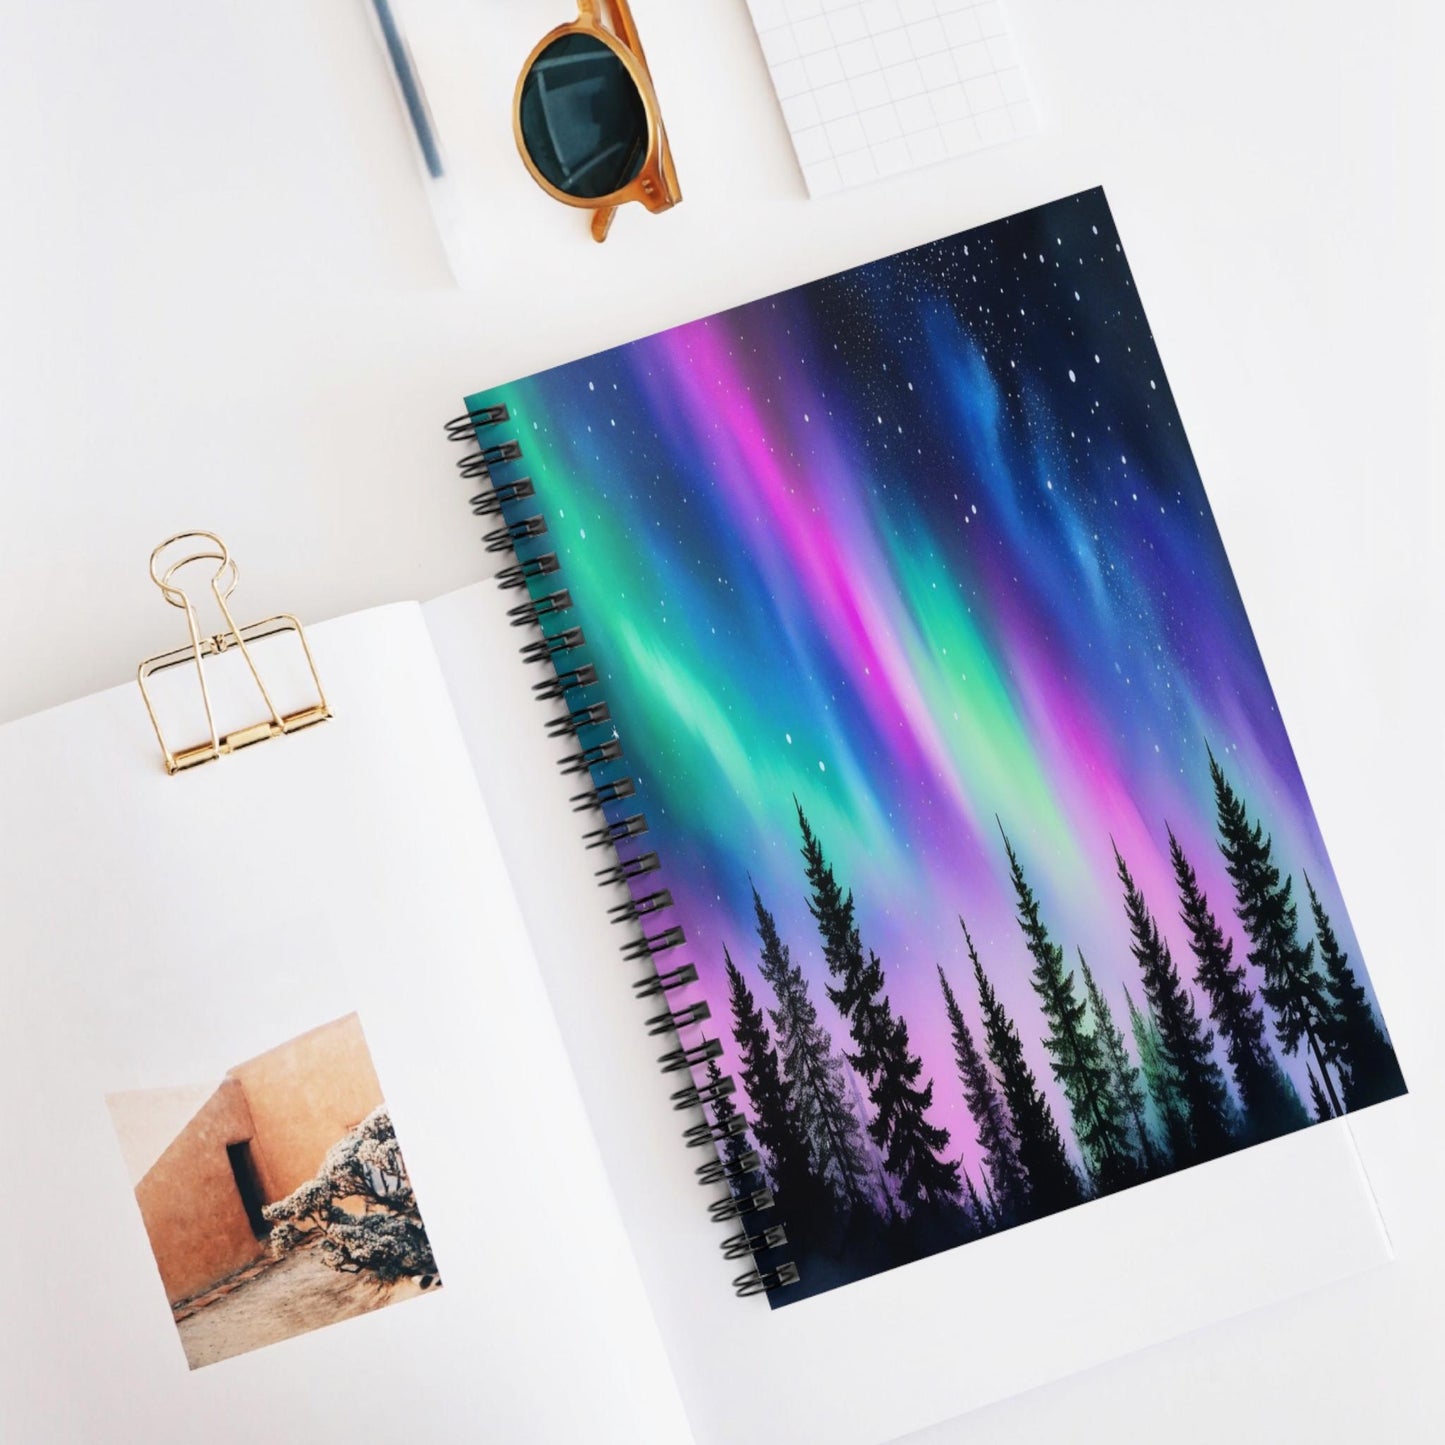 Unique Aurora Borealis Spiral Notebook Ruled Line - Personalized Northern Light View - Stationary Accessories - Perfect Aurora Lovers Gift 44